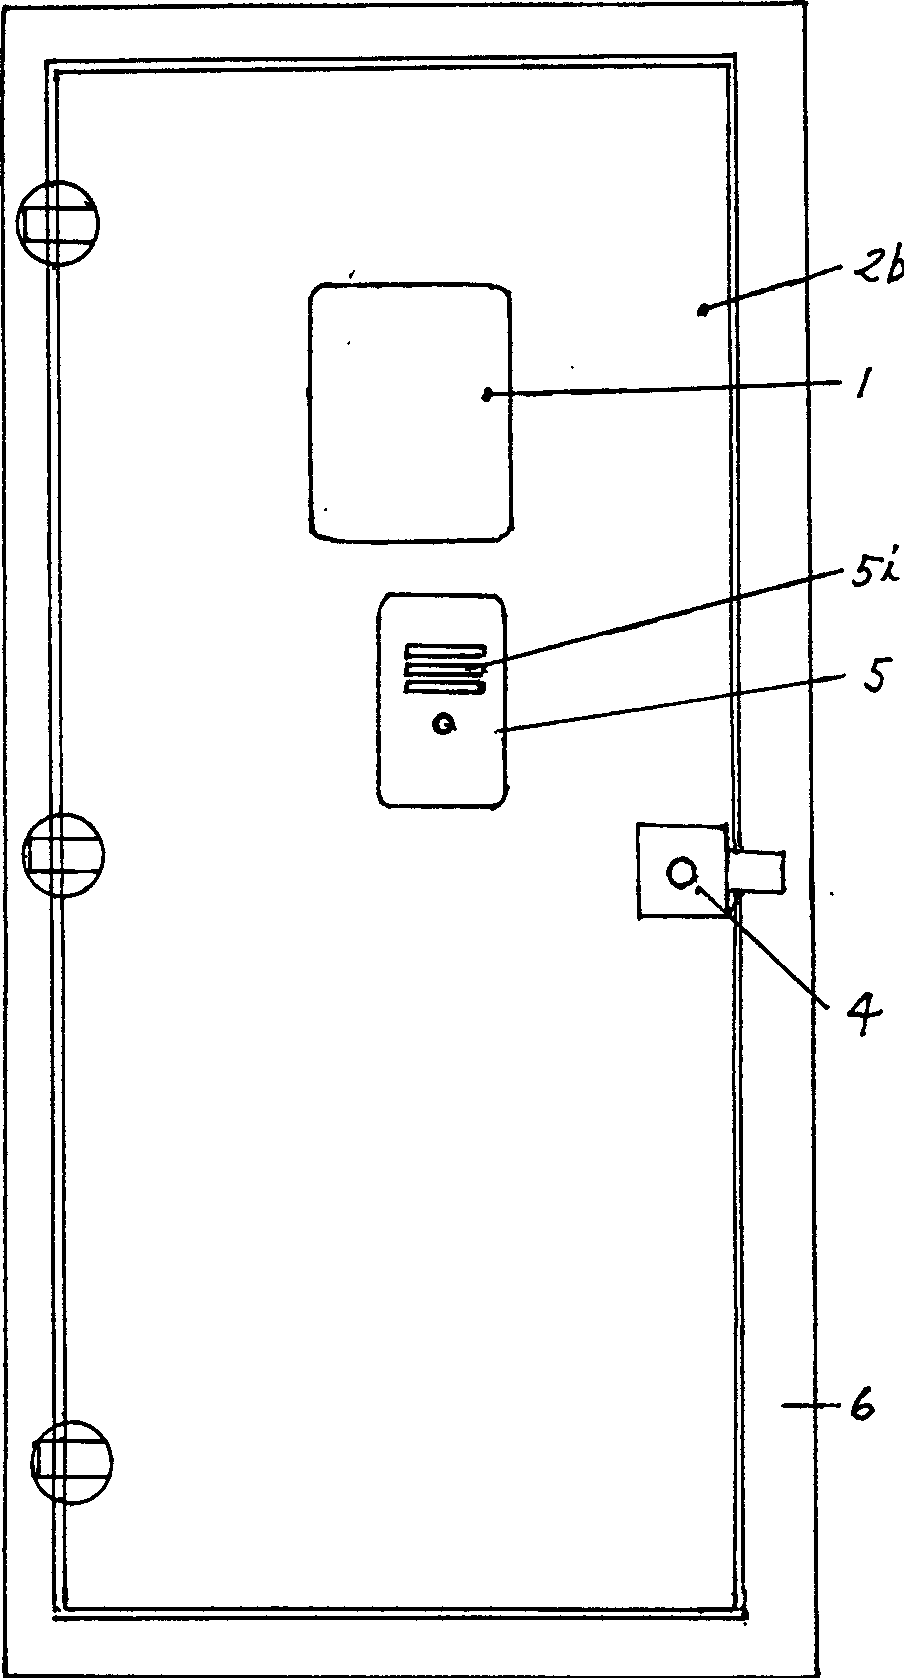 Anti-theft door with intelligent alarm and visible intercom functions